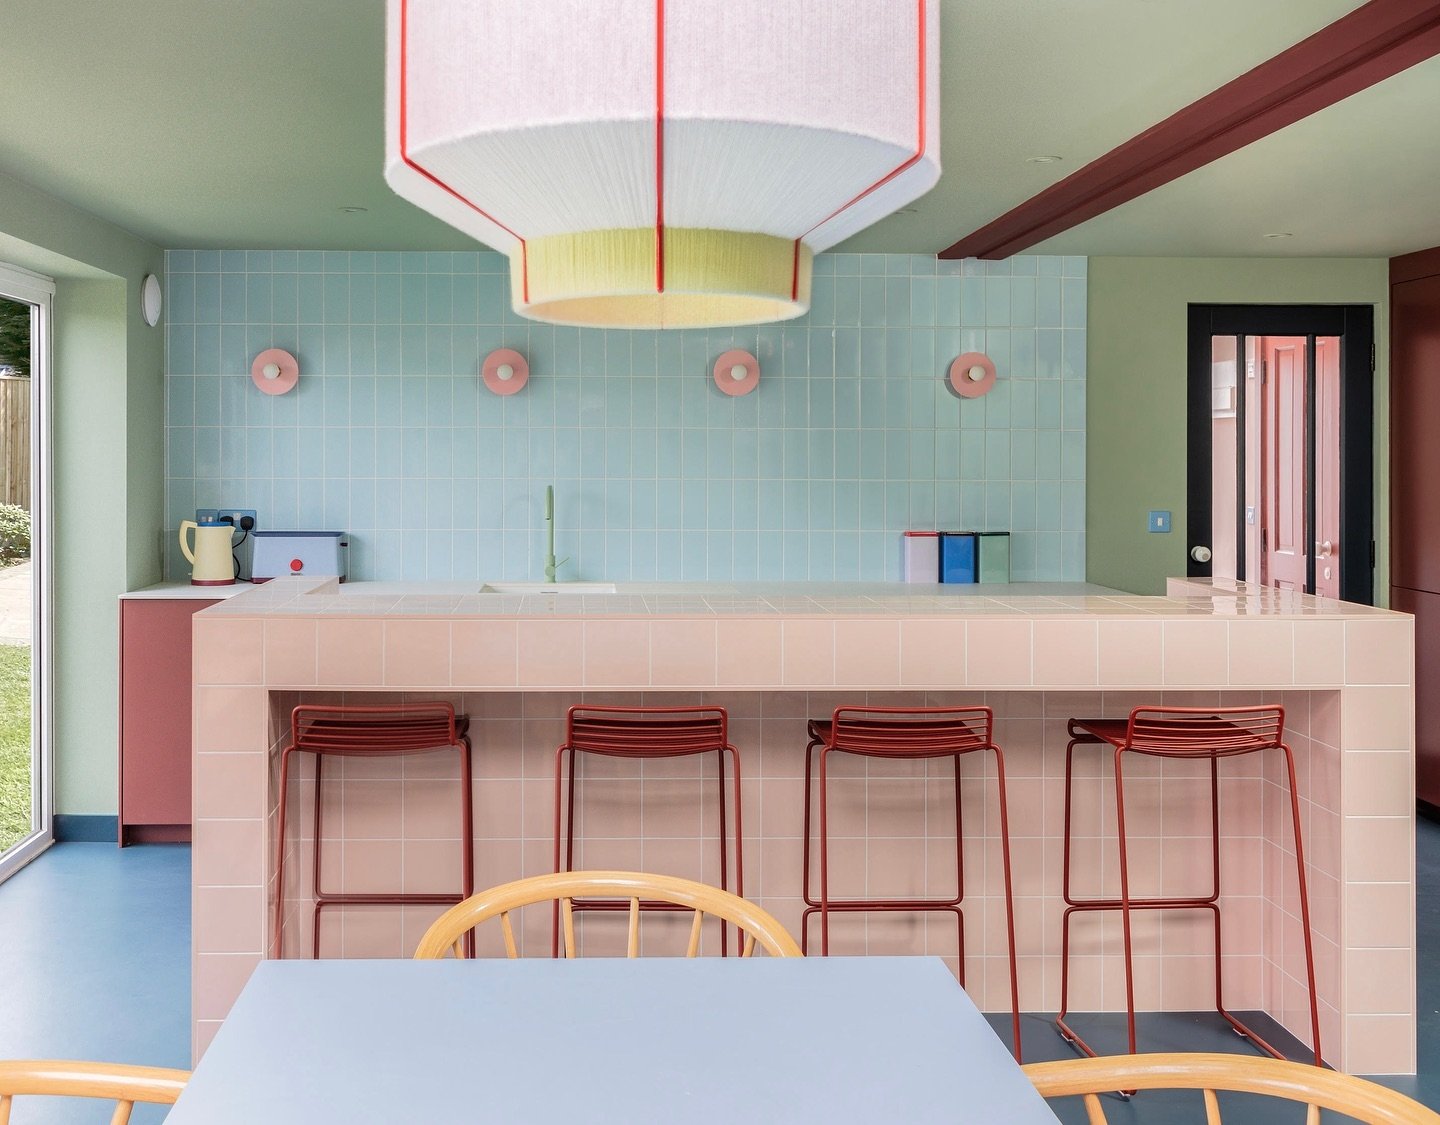 A recently finished home renovation project in Cornwall, by the fab @studio.far.west! Our pink Candy Bracelet&rsquo;s sitting so perfectly here in the new pastel perfect kitchen! 🍬 Look at that kitchen island! 🌸